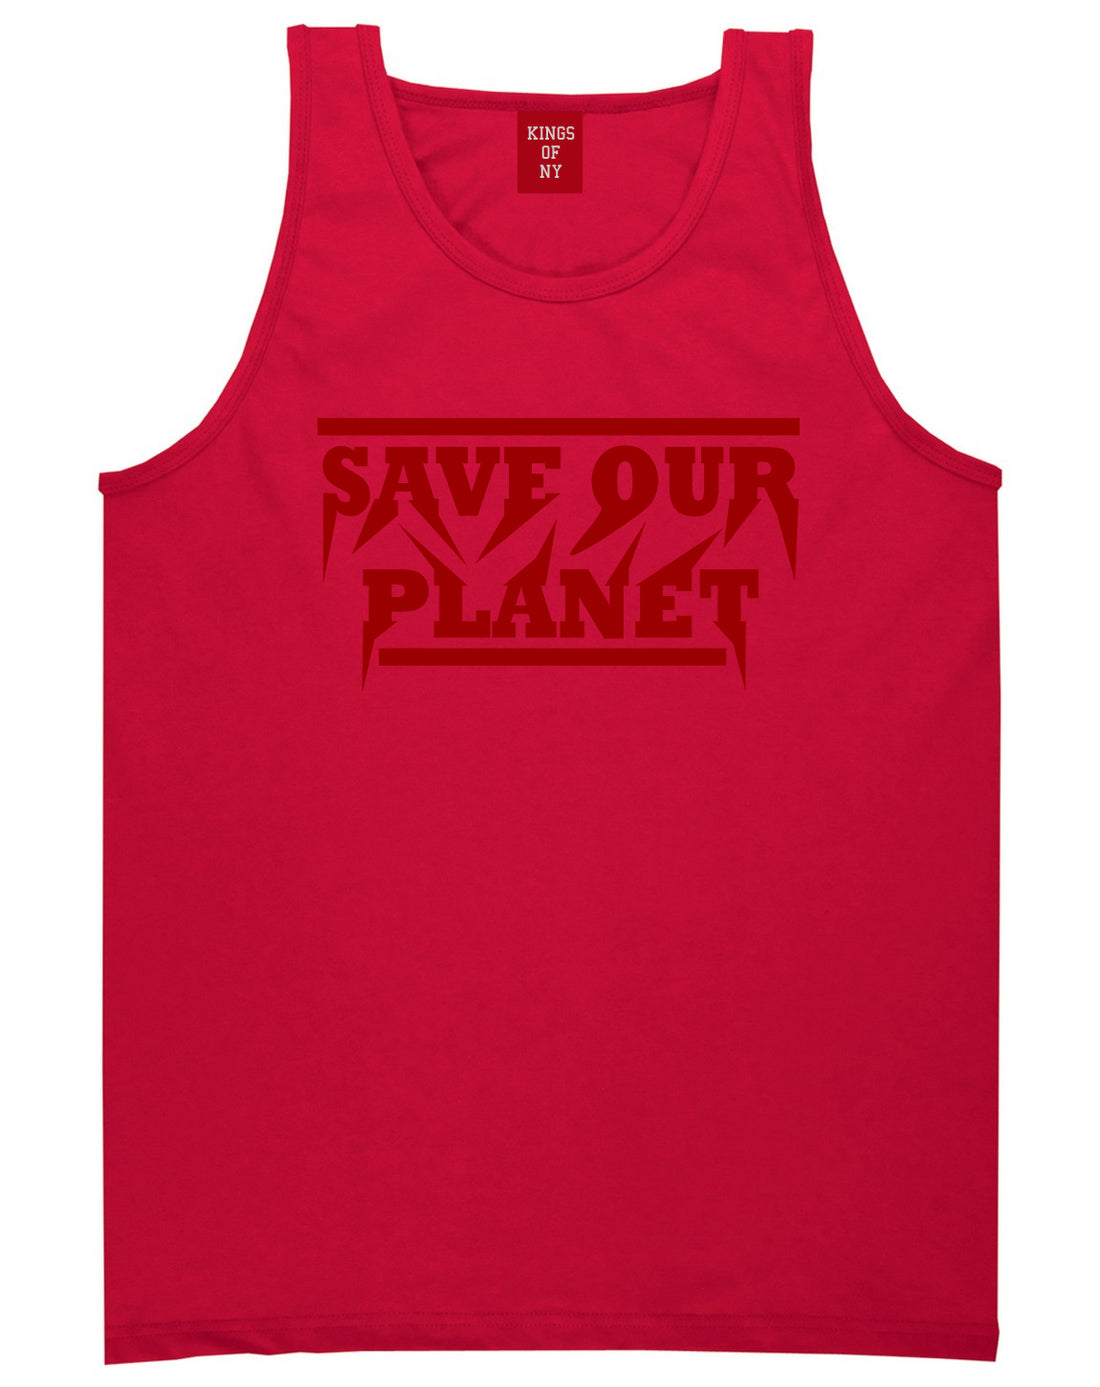 Save Our Planet Mens Tank Top Shirt Red